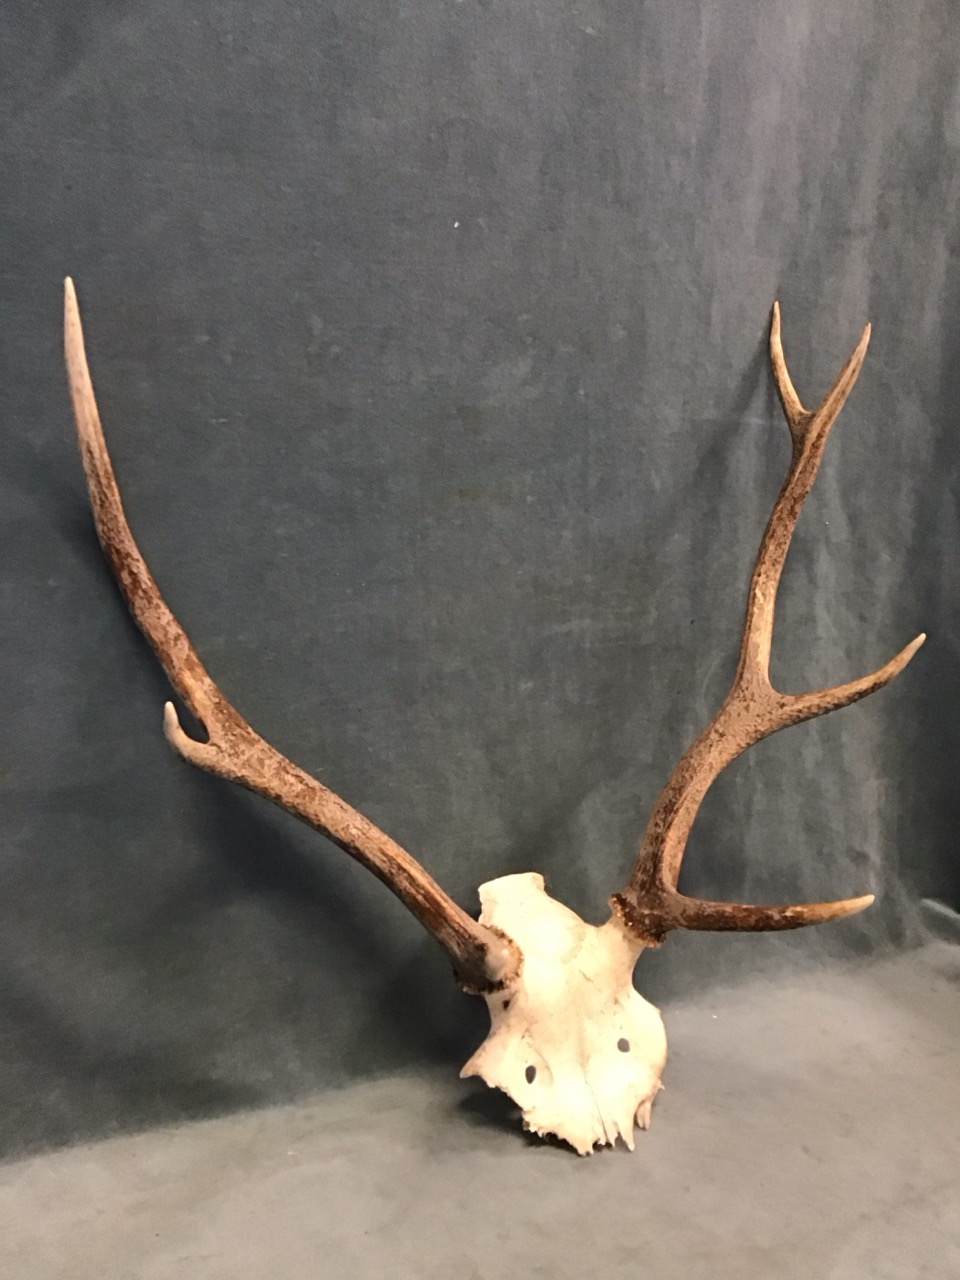 A set of 8-point stag antlers with pierced skull. (20in x 23in) - Image 3 of 3